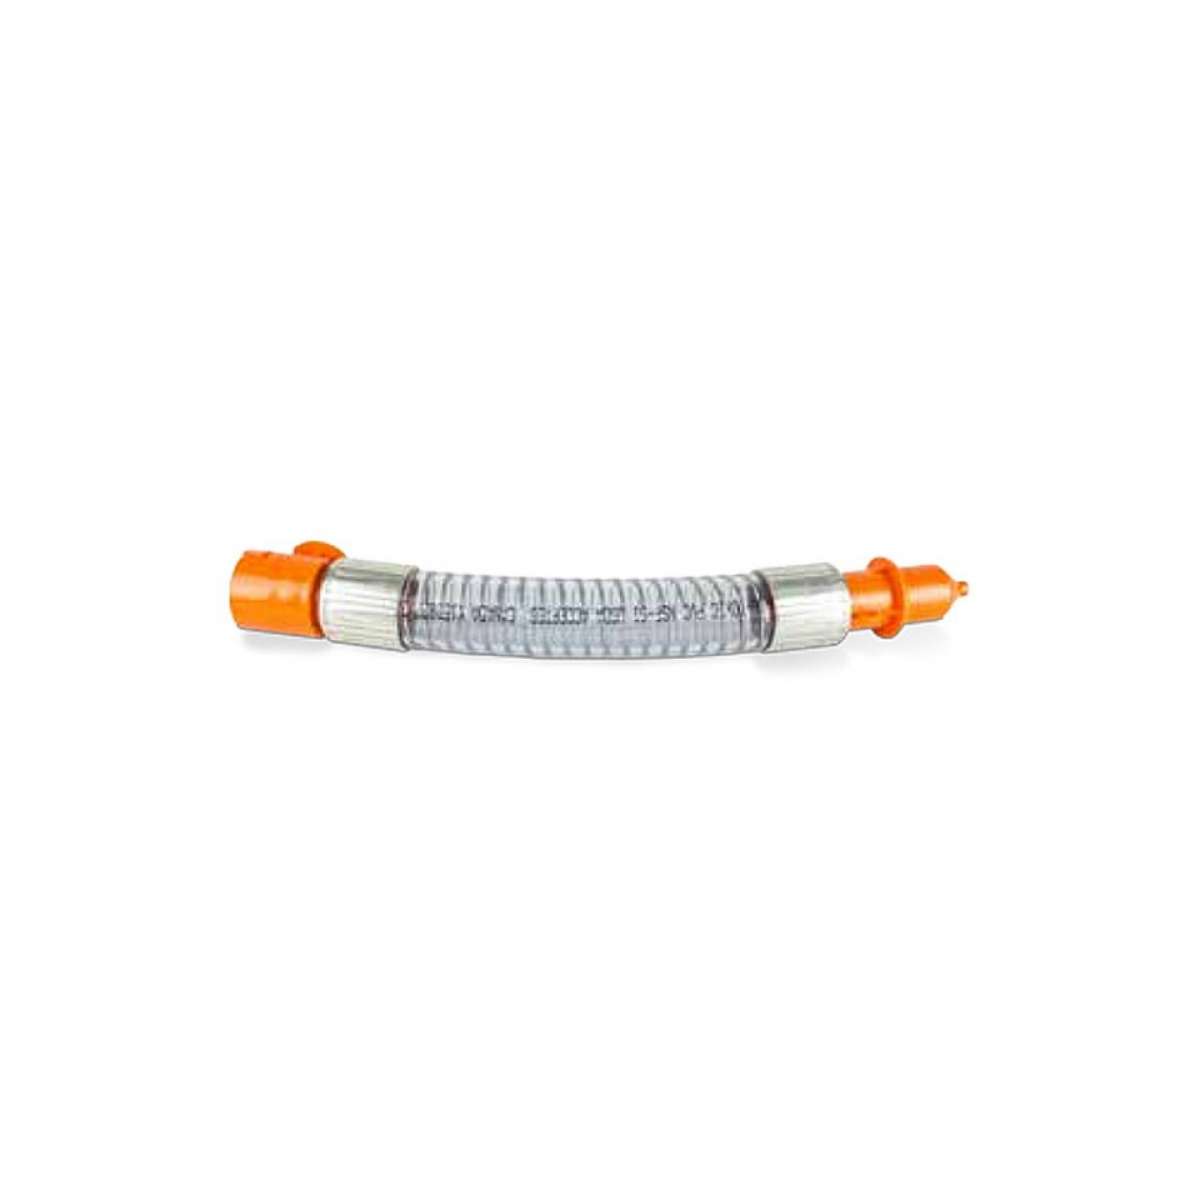 IsoLink 16" Extended Spout with 1/4" Tip - Orange